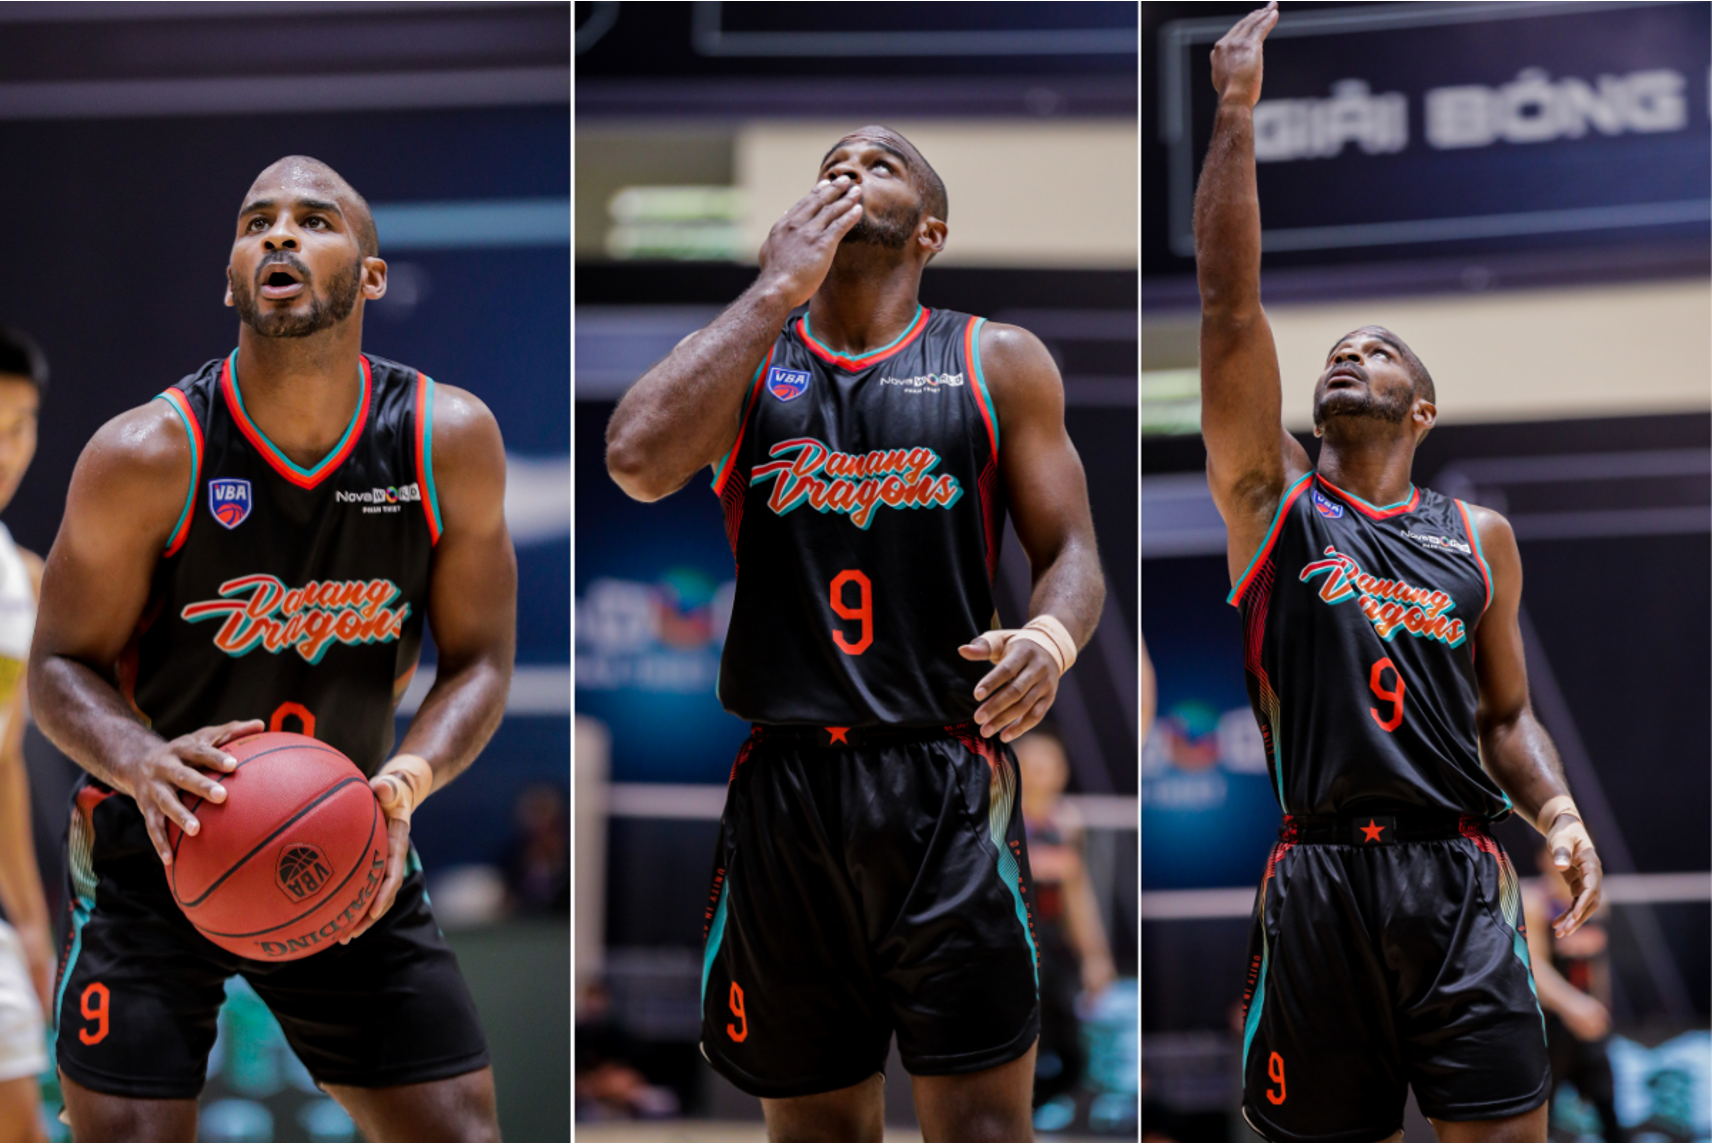 Akeem Scoot of Danang Dragons and his signature moves during a free throw. Photo: VBA